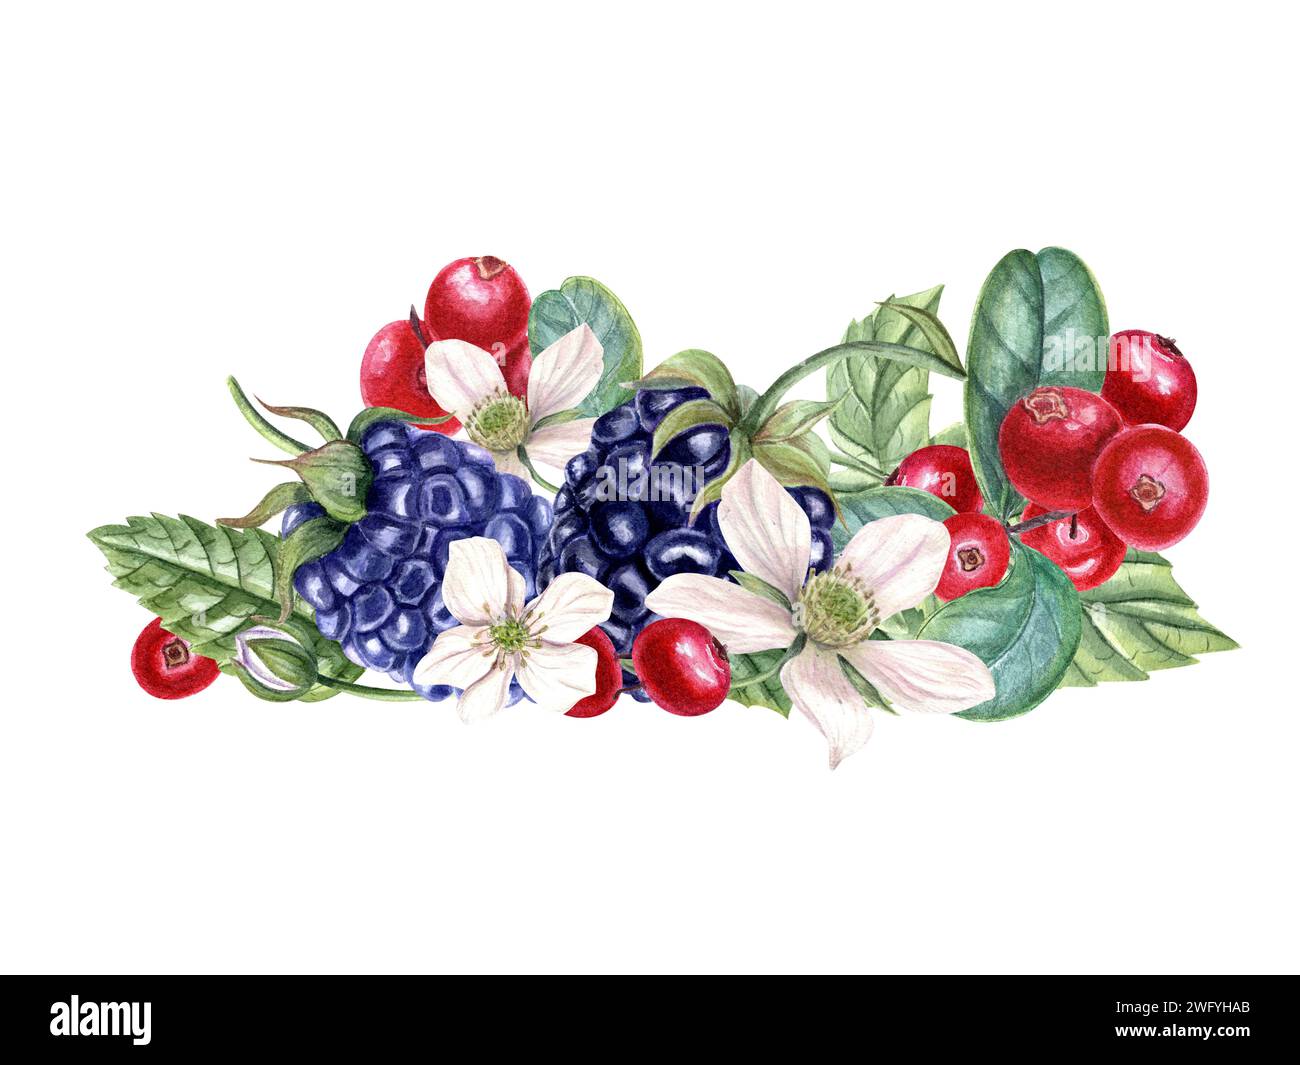 Bouquet with fresh blackberry and lingonberry. Red, black berries, flowers, buds on branch with leaves. Dewberry, bramble, cowberry. Watercolor Stock Photo